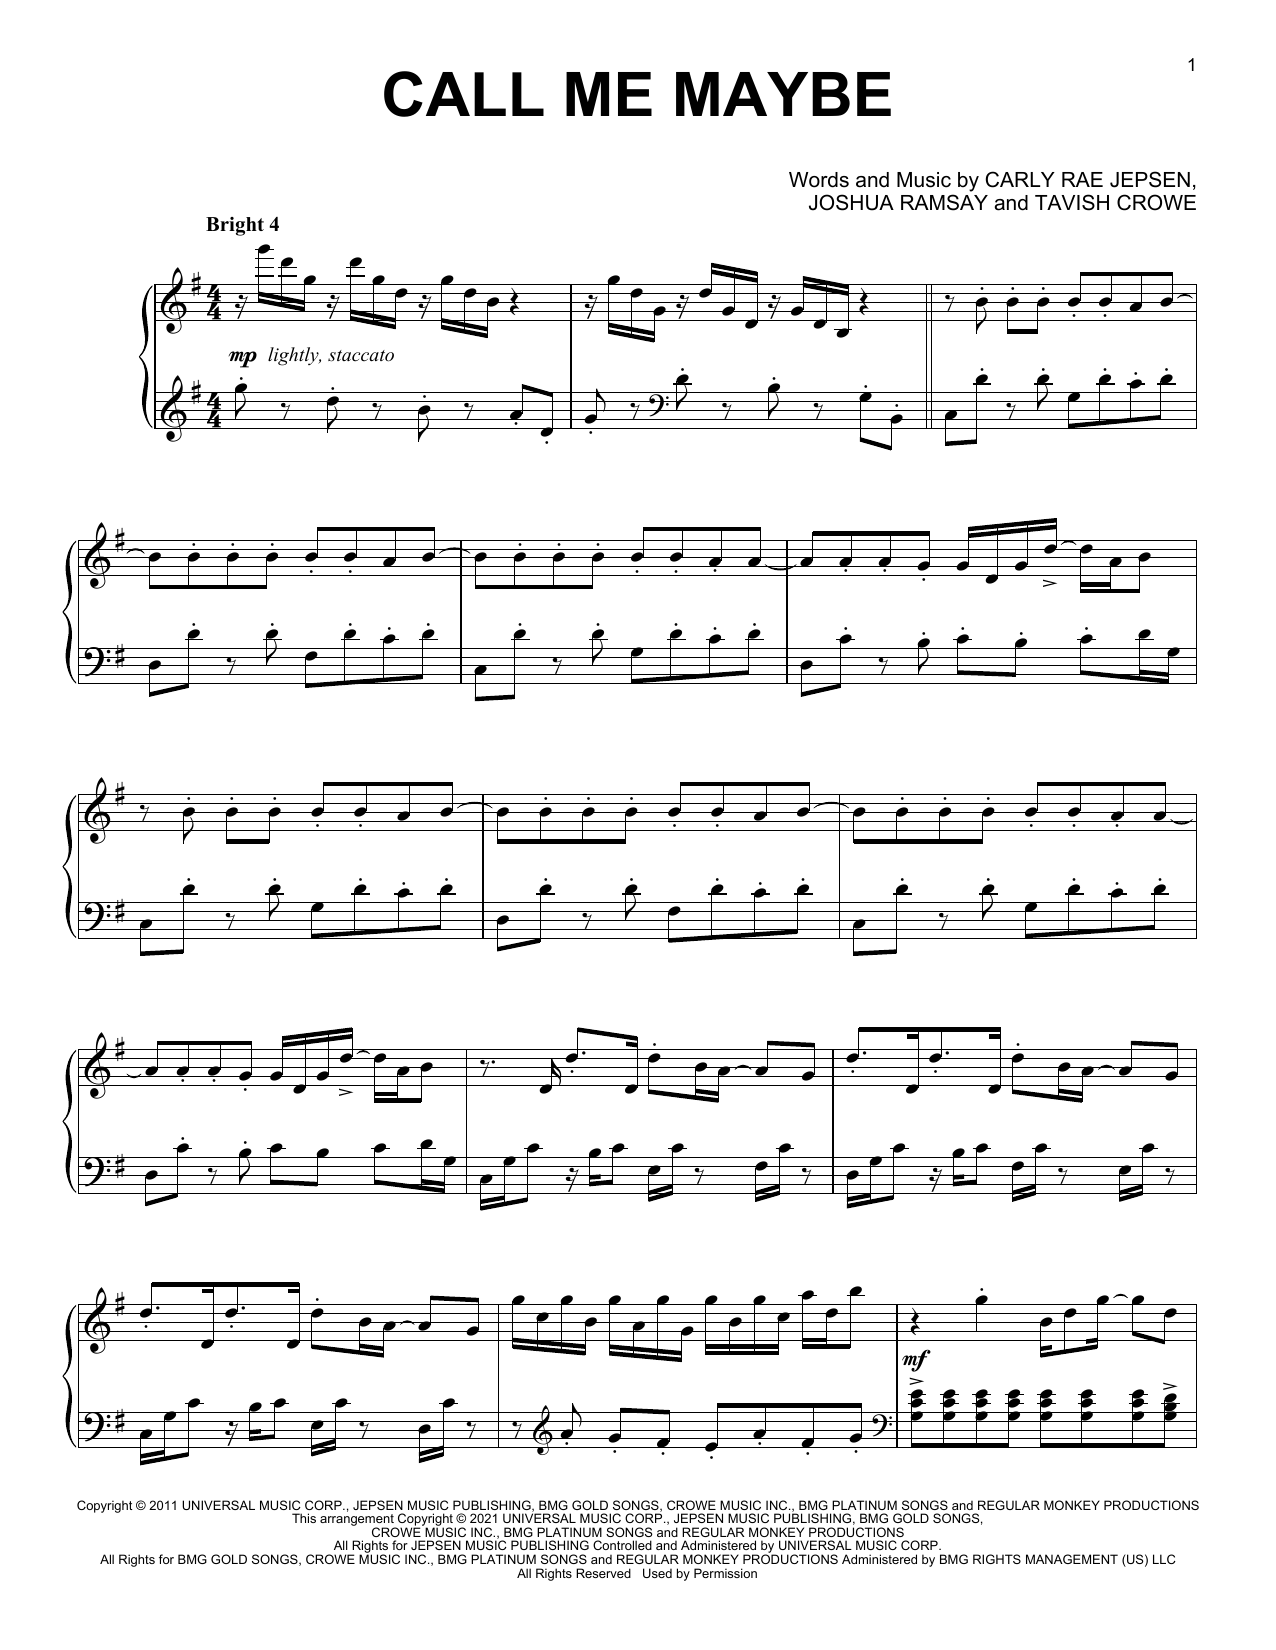 Download Carly Rae Jepsen Call Me Maybe [Classical version] Sheet Music